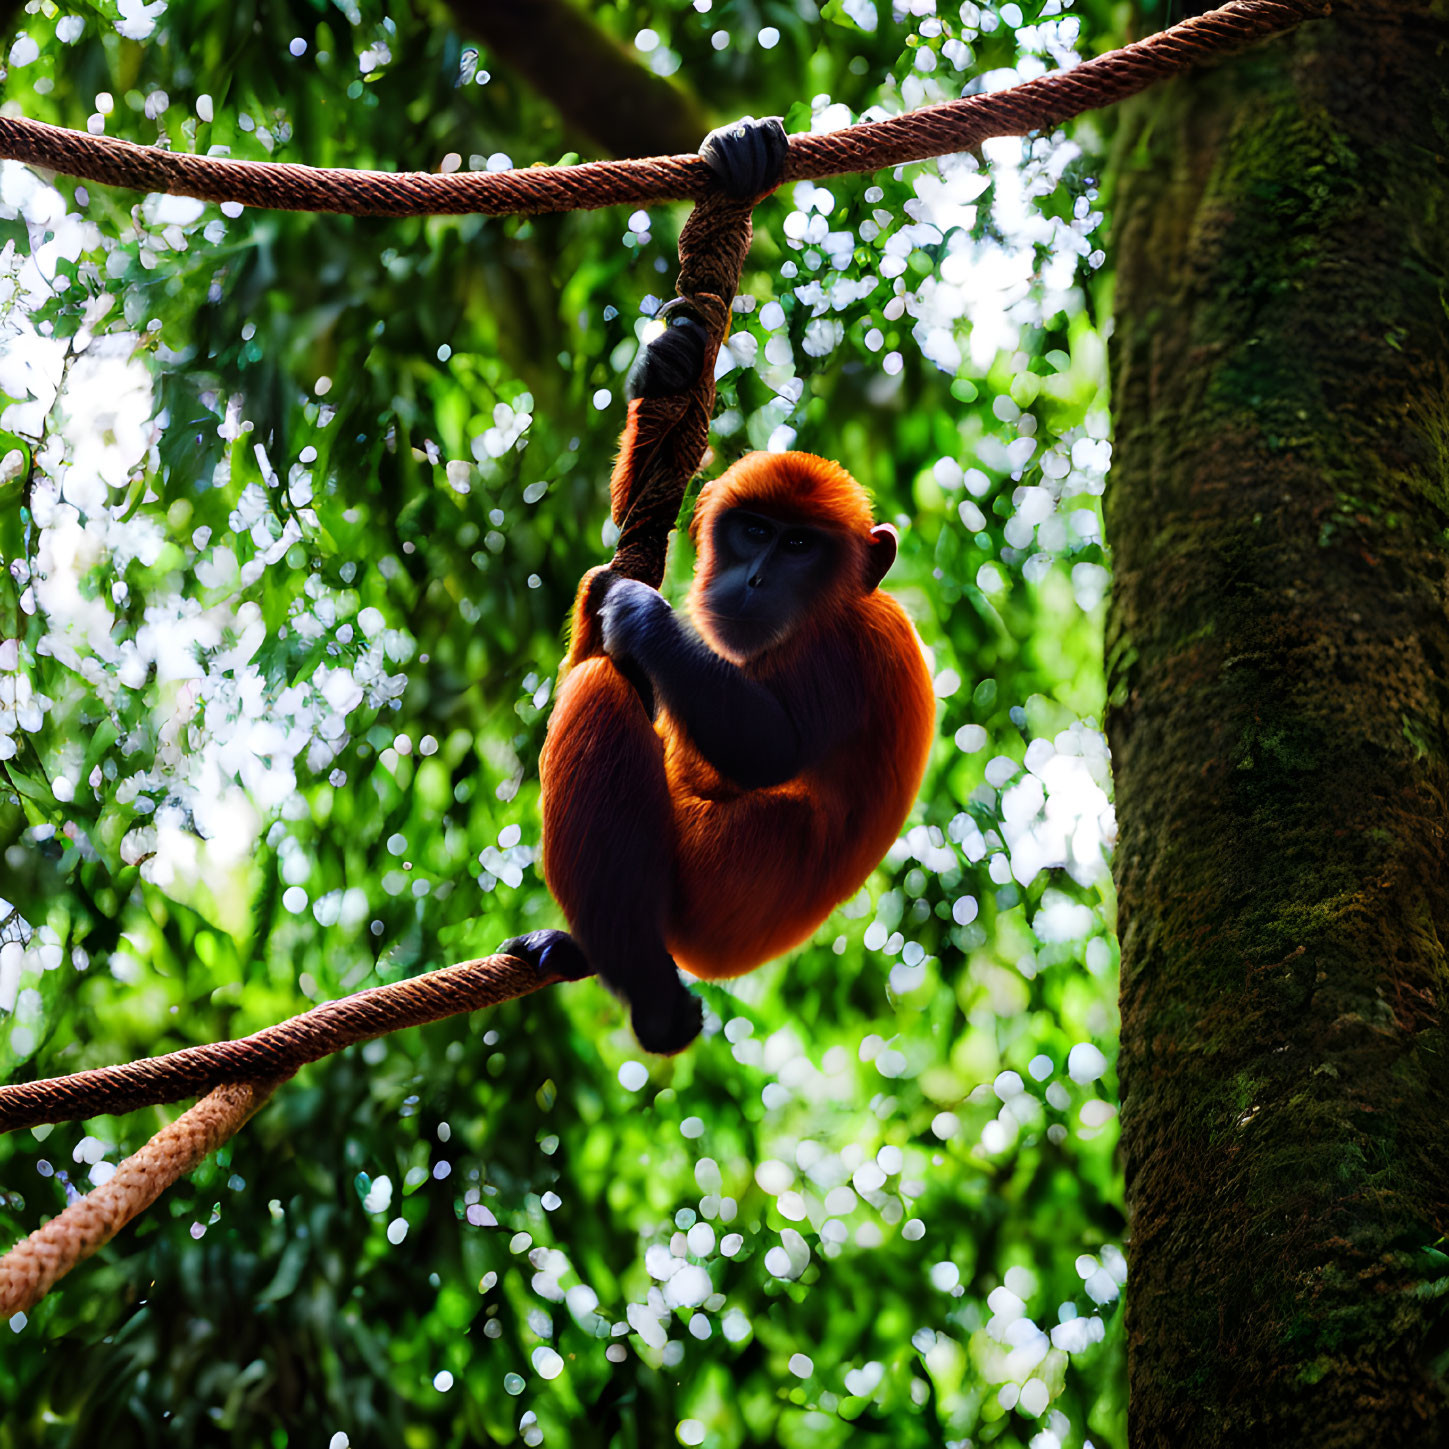 Red-haired monkey hanging on thick rope in lush green foliage